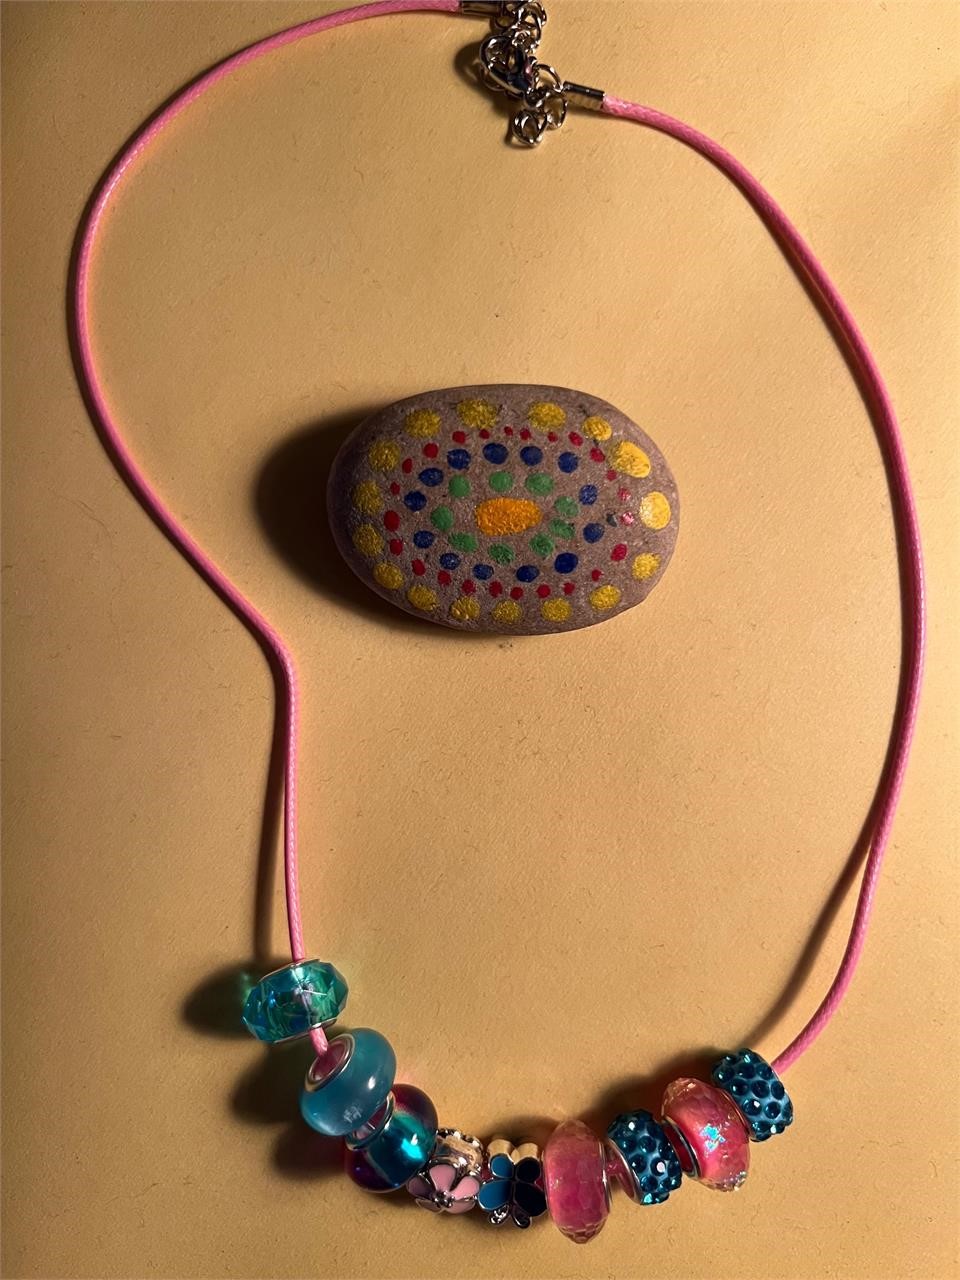 Necklace & Painted Rock by 7 year old client